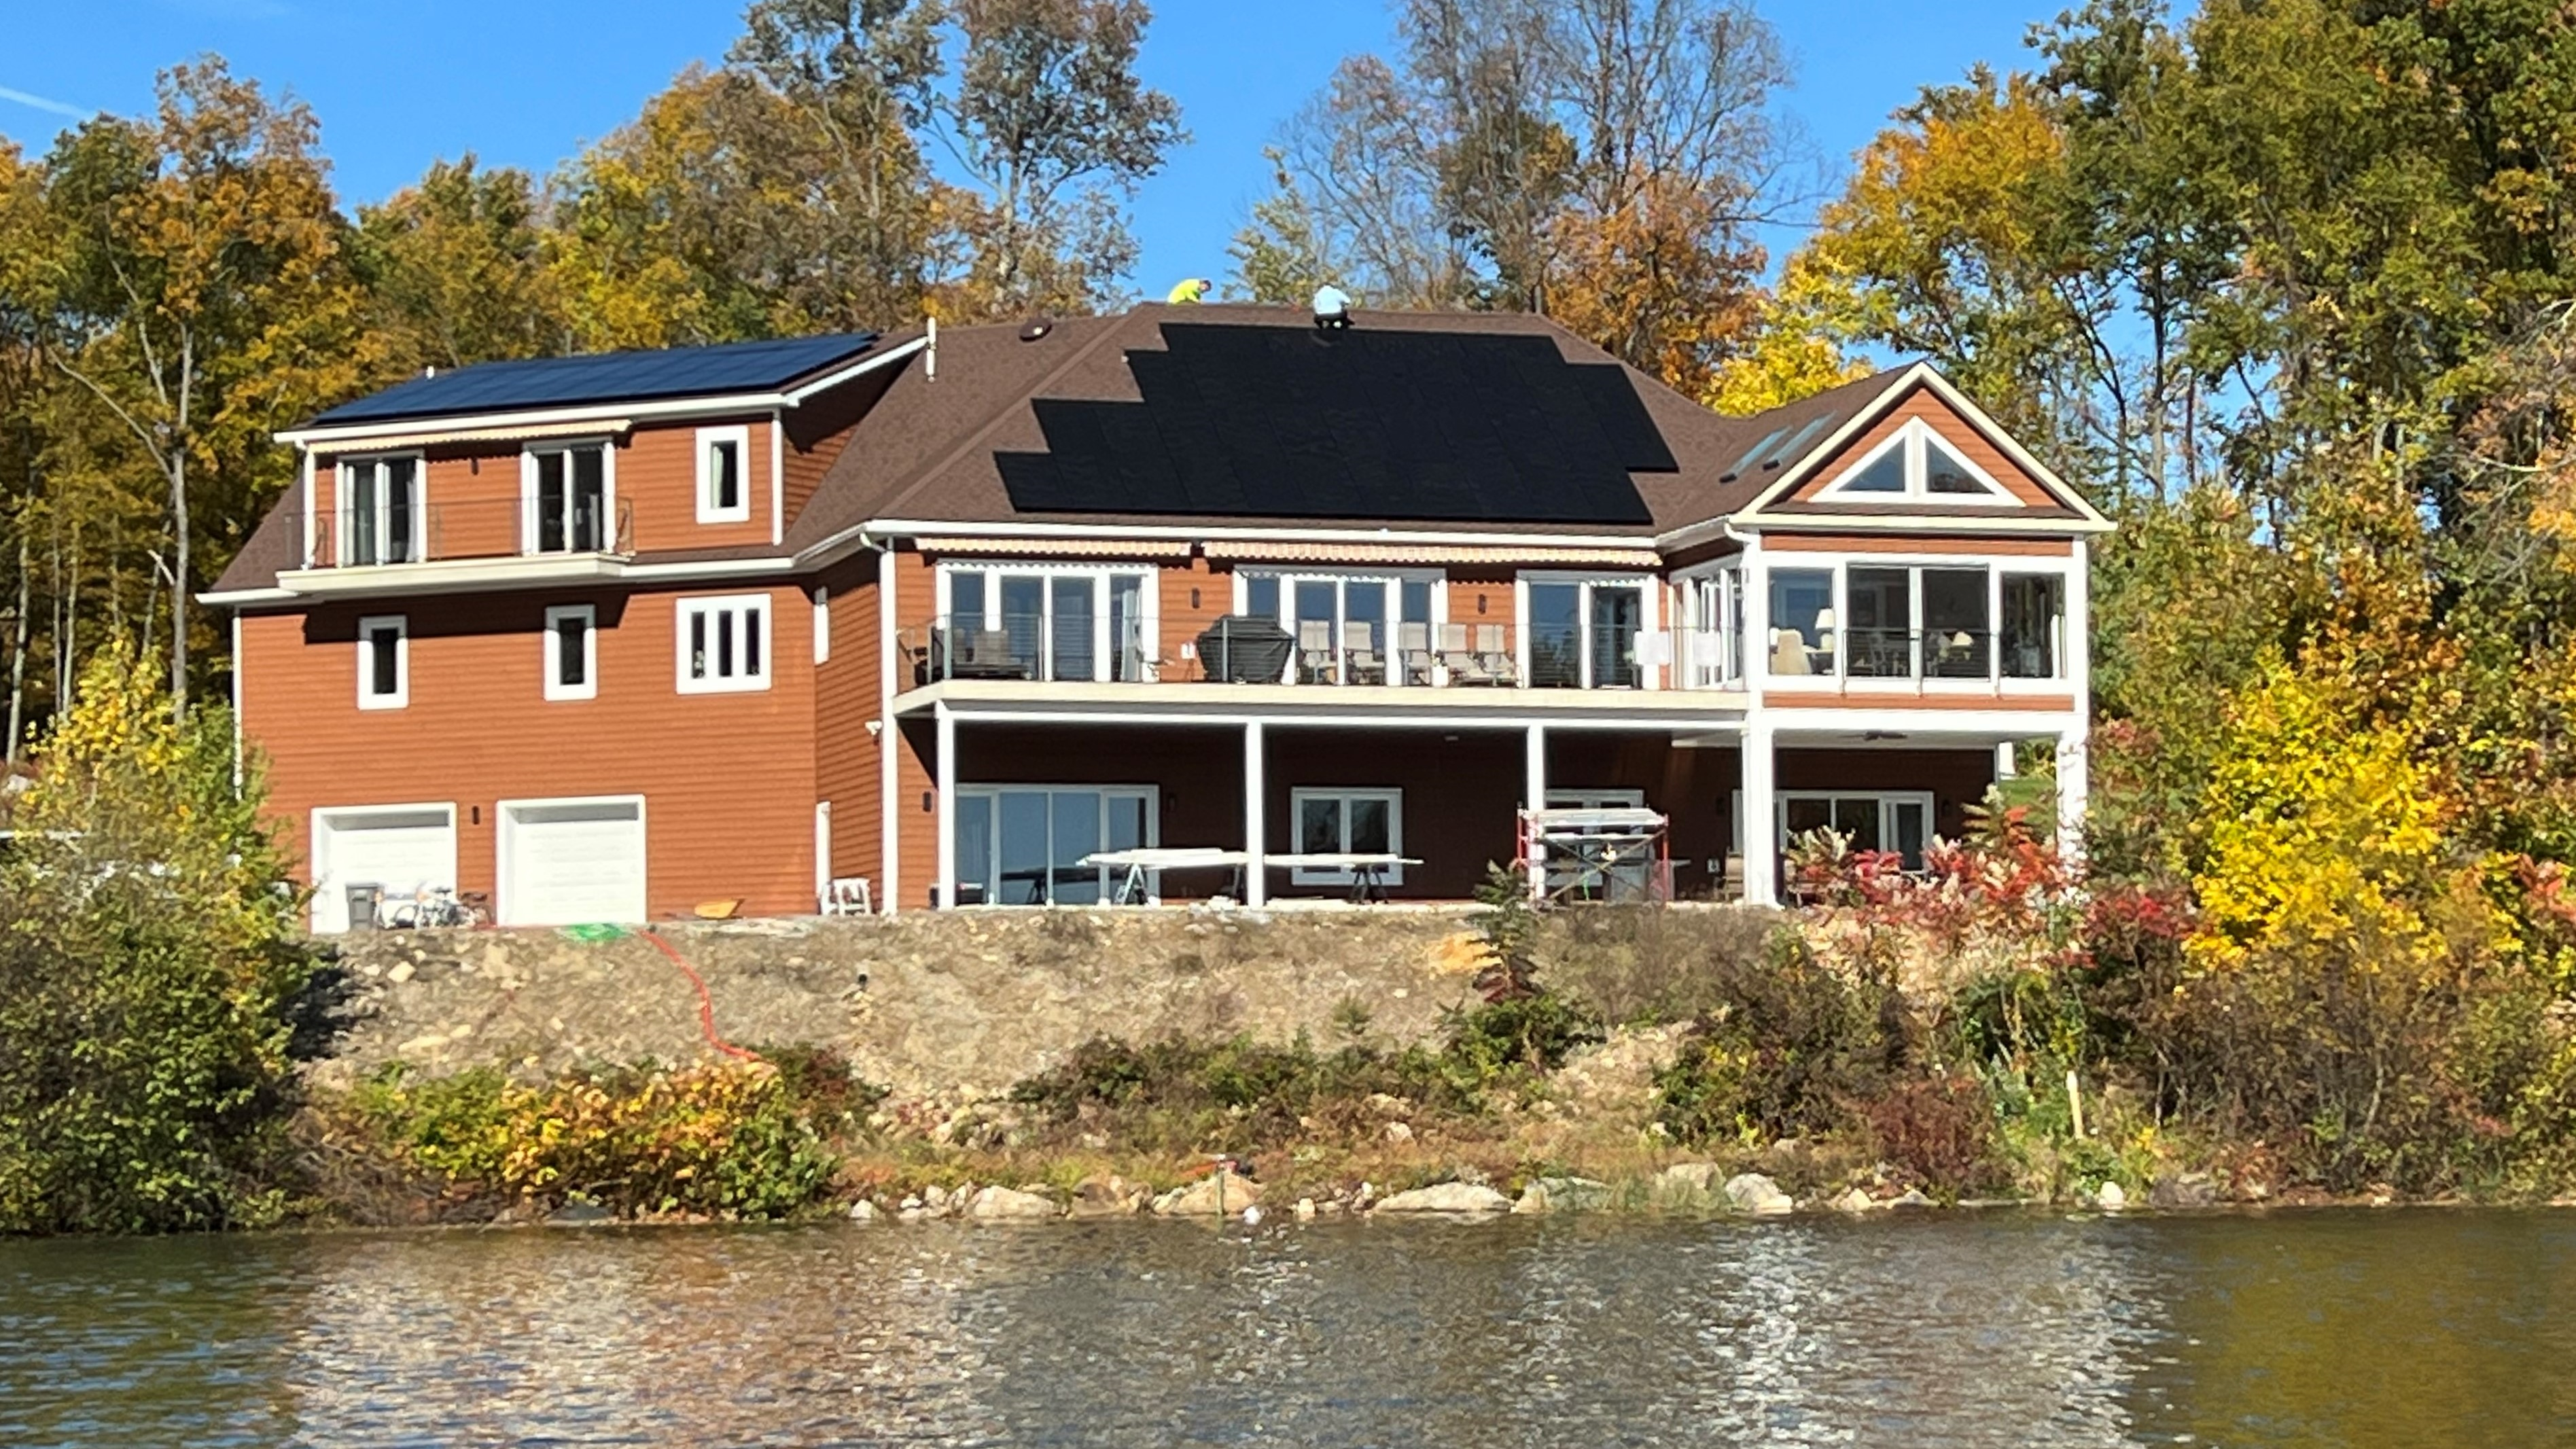 Completed construction of a home built with ICF. The home has solar panels on the roof and overlooks a body of water.